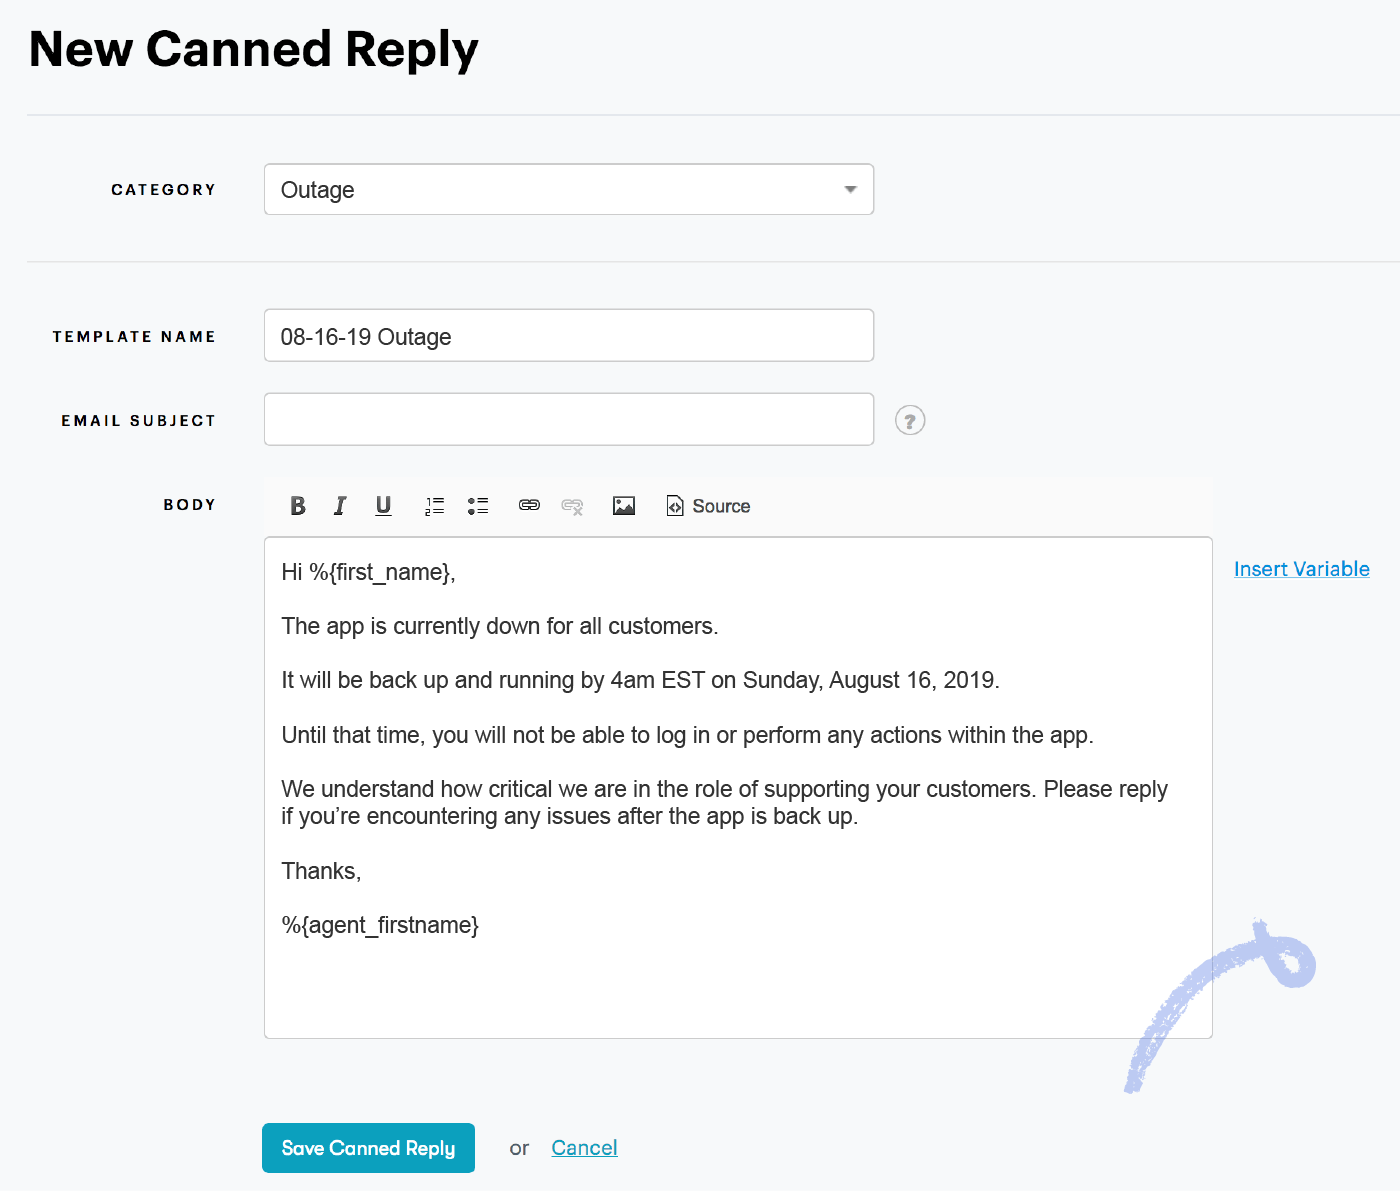 example of a canned reply for outages